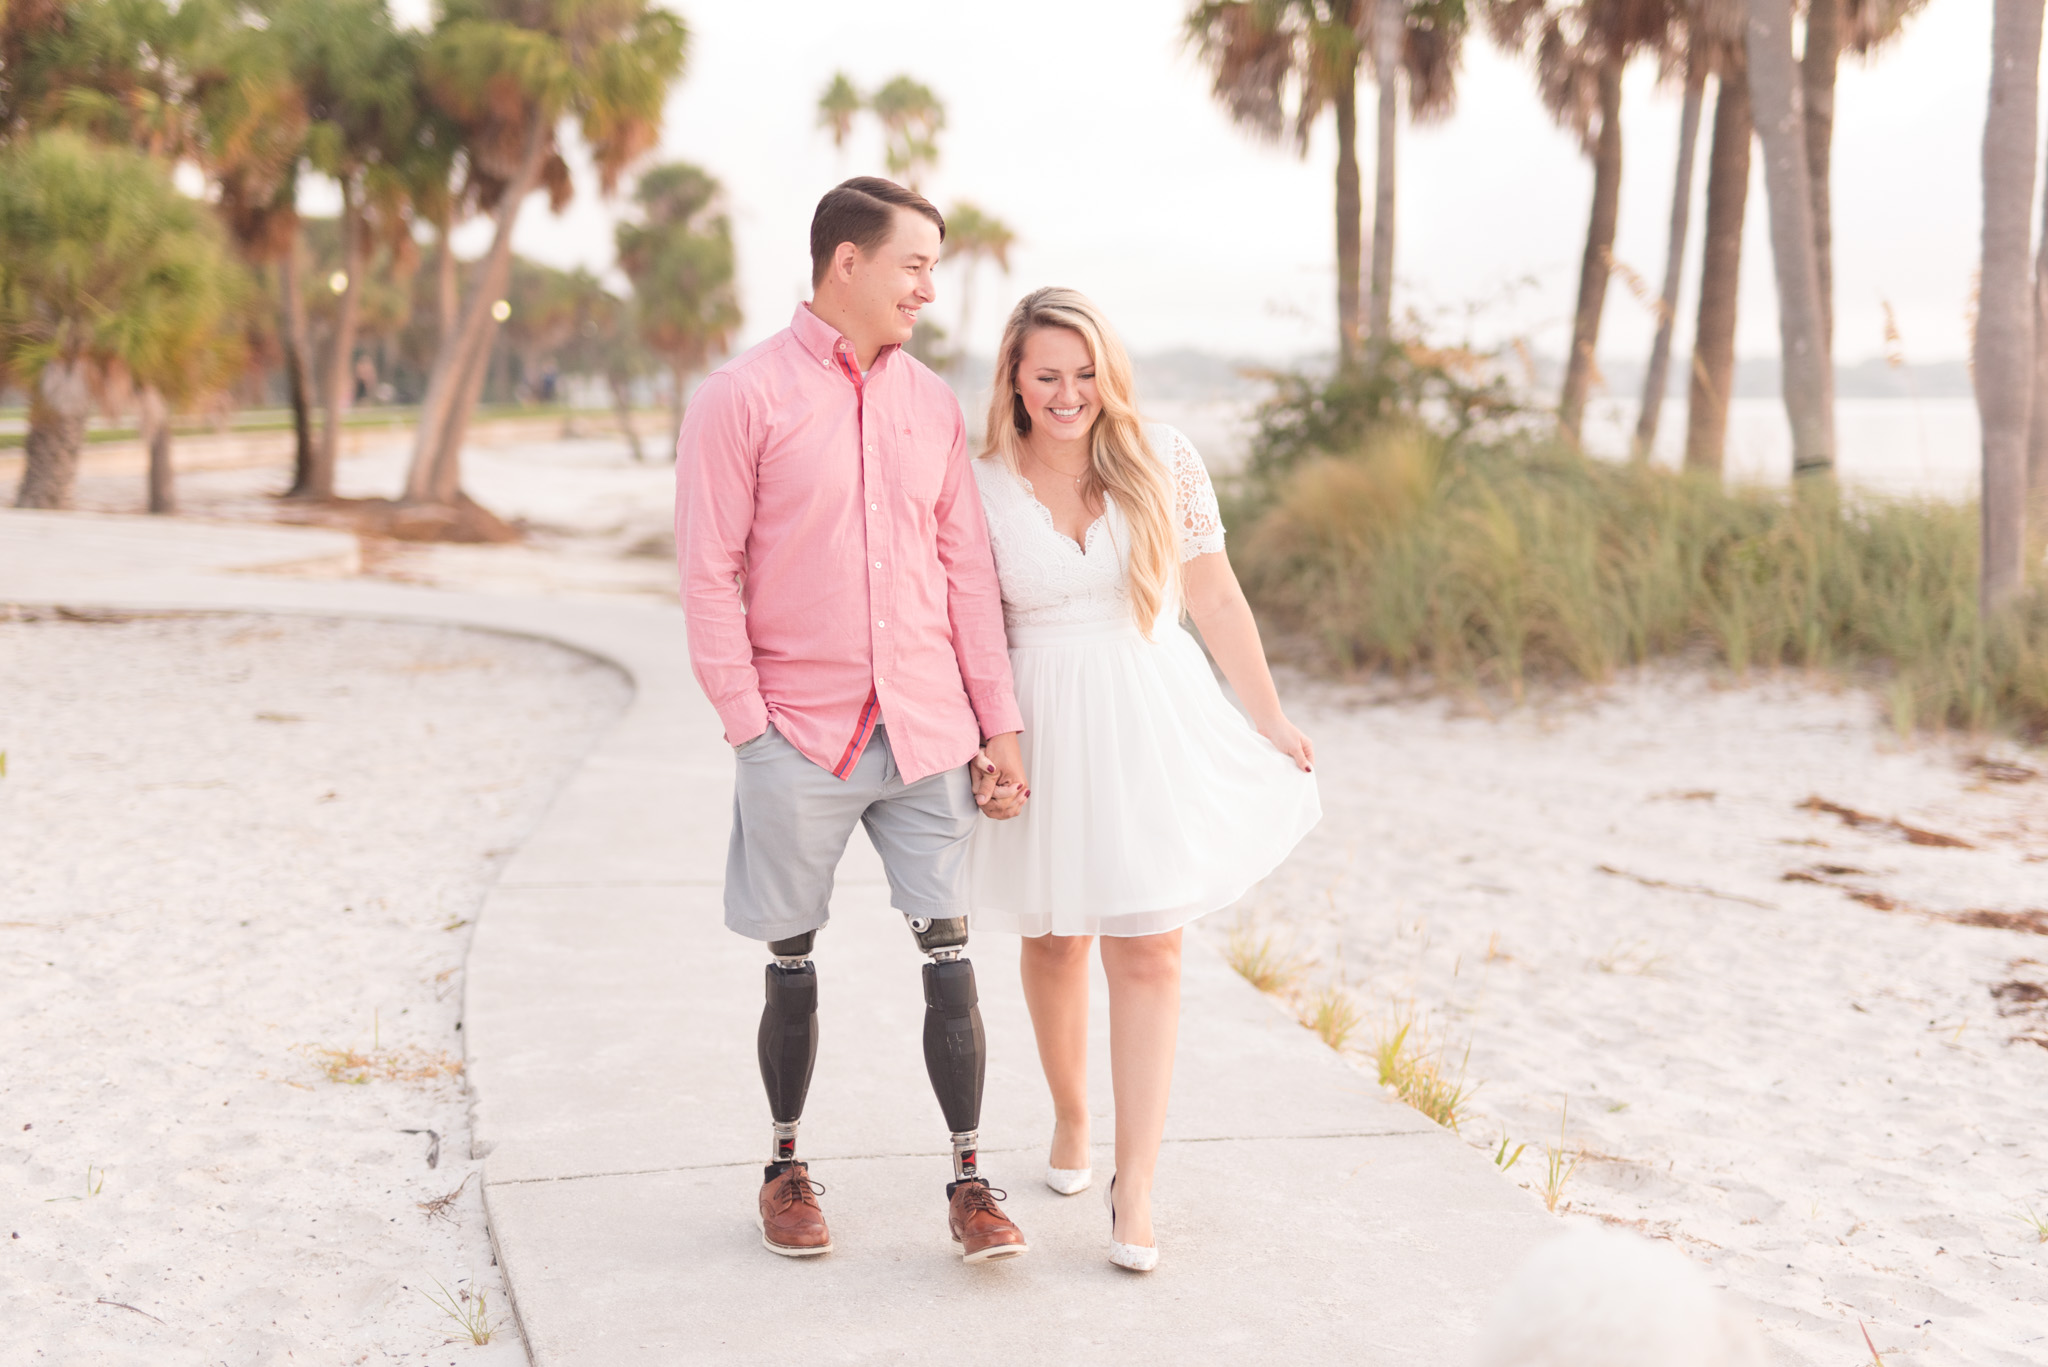 Couple walks down beach path and laughs.